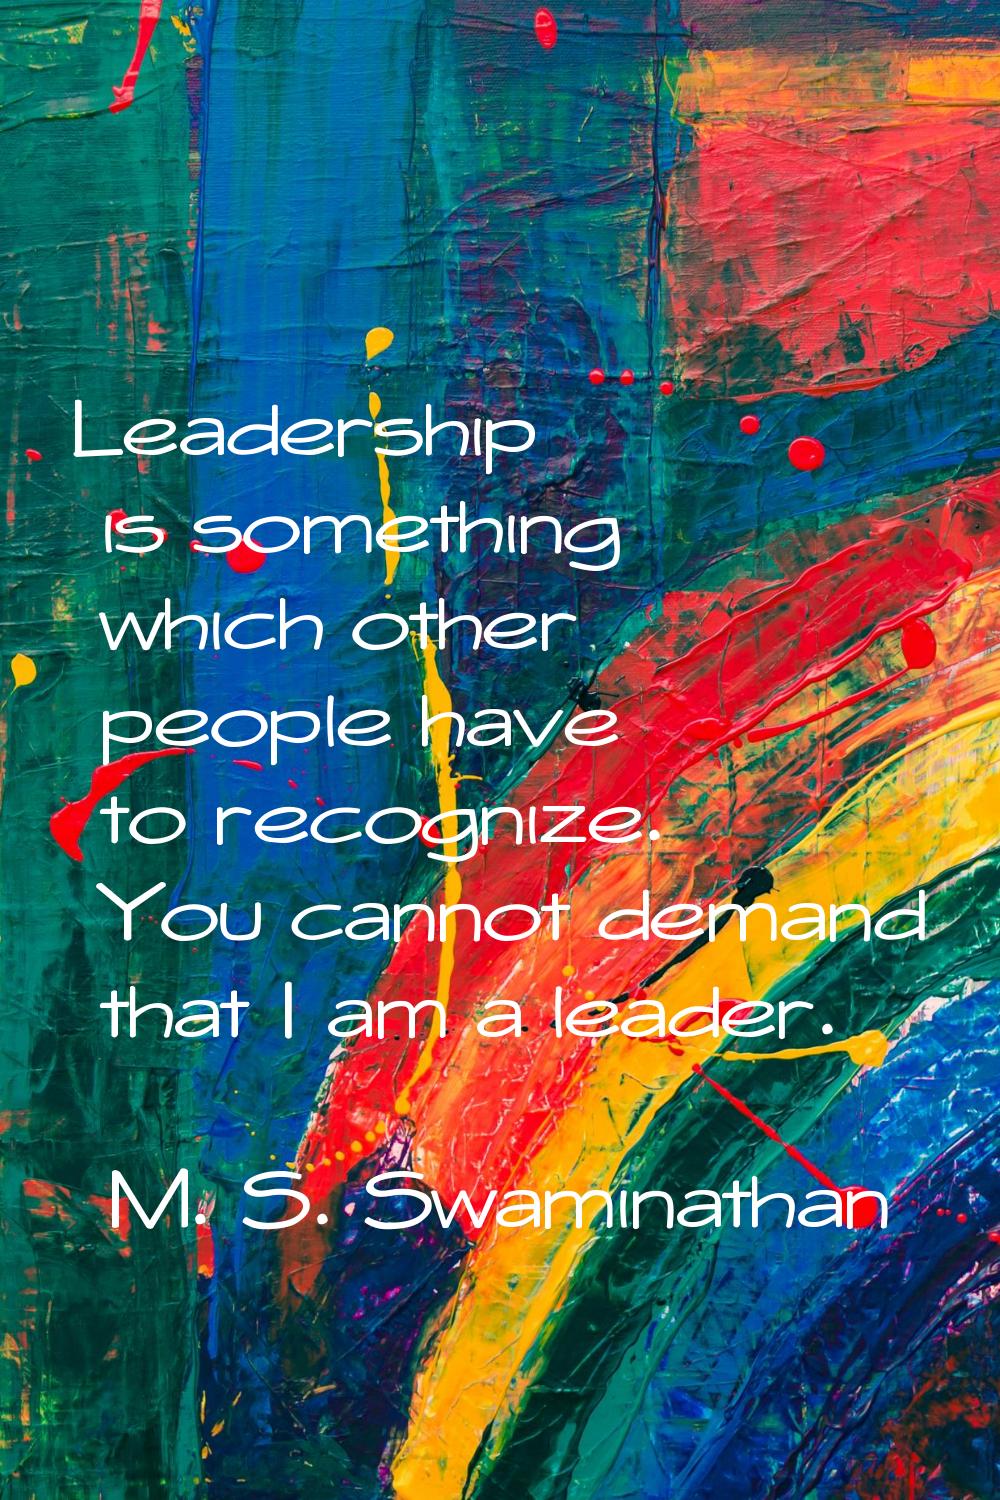 Leadership is something which other people have to recognize. You cannot demand that I am a leader.